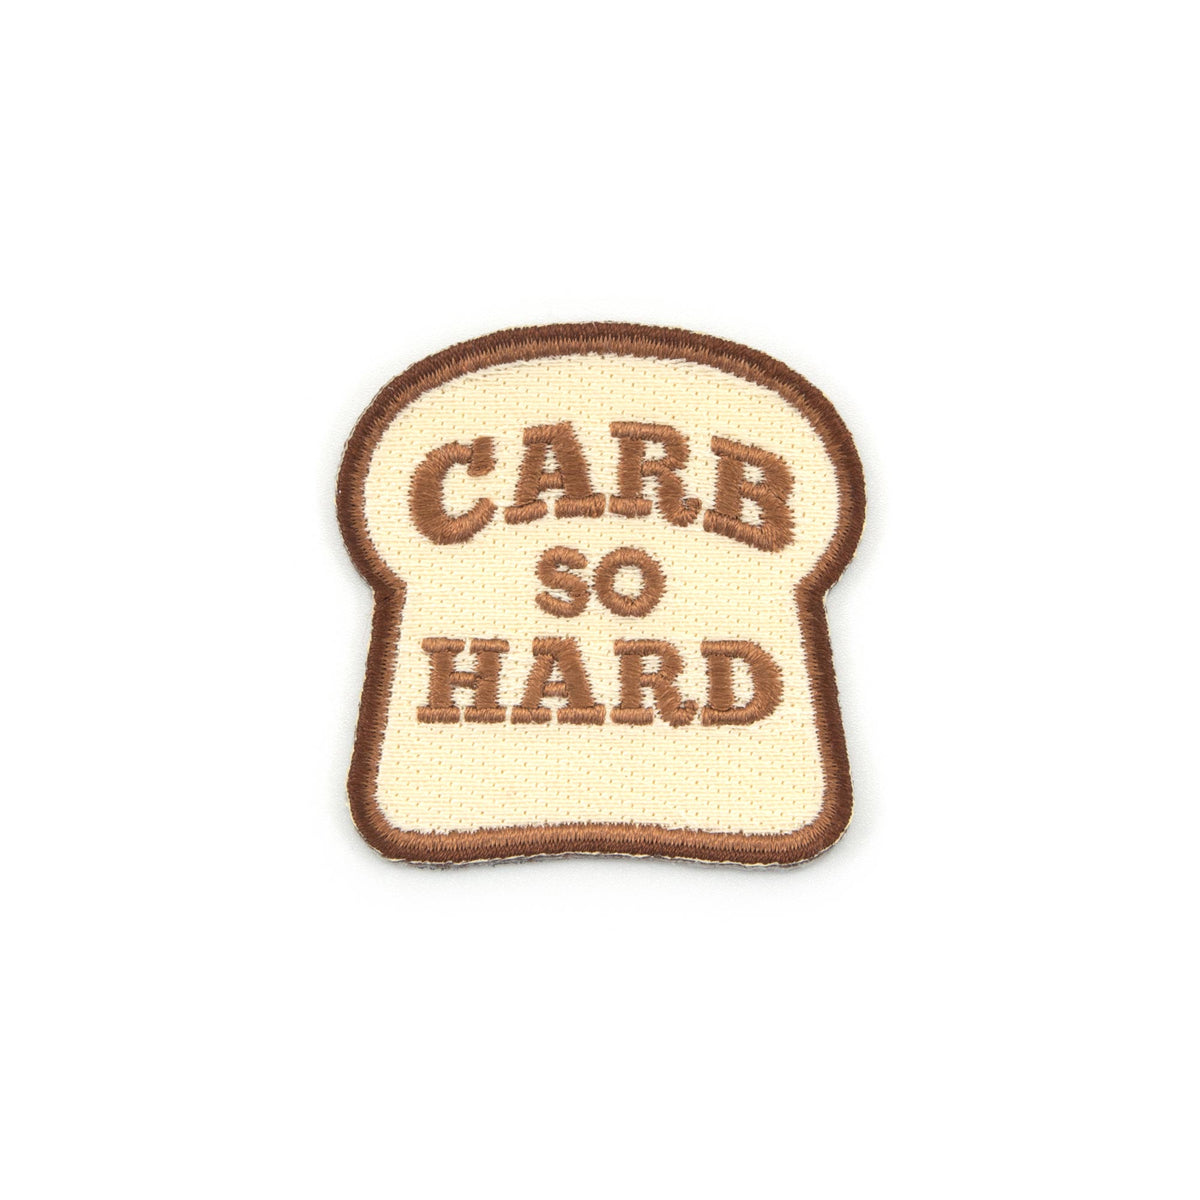 Carb So Hard embroidered iron-on patch